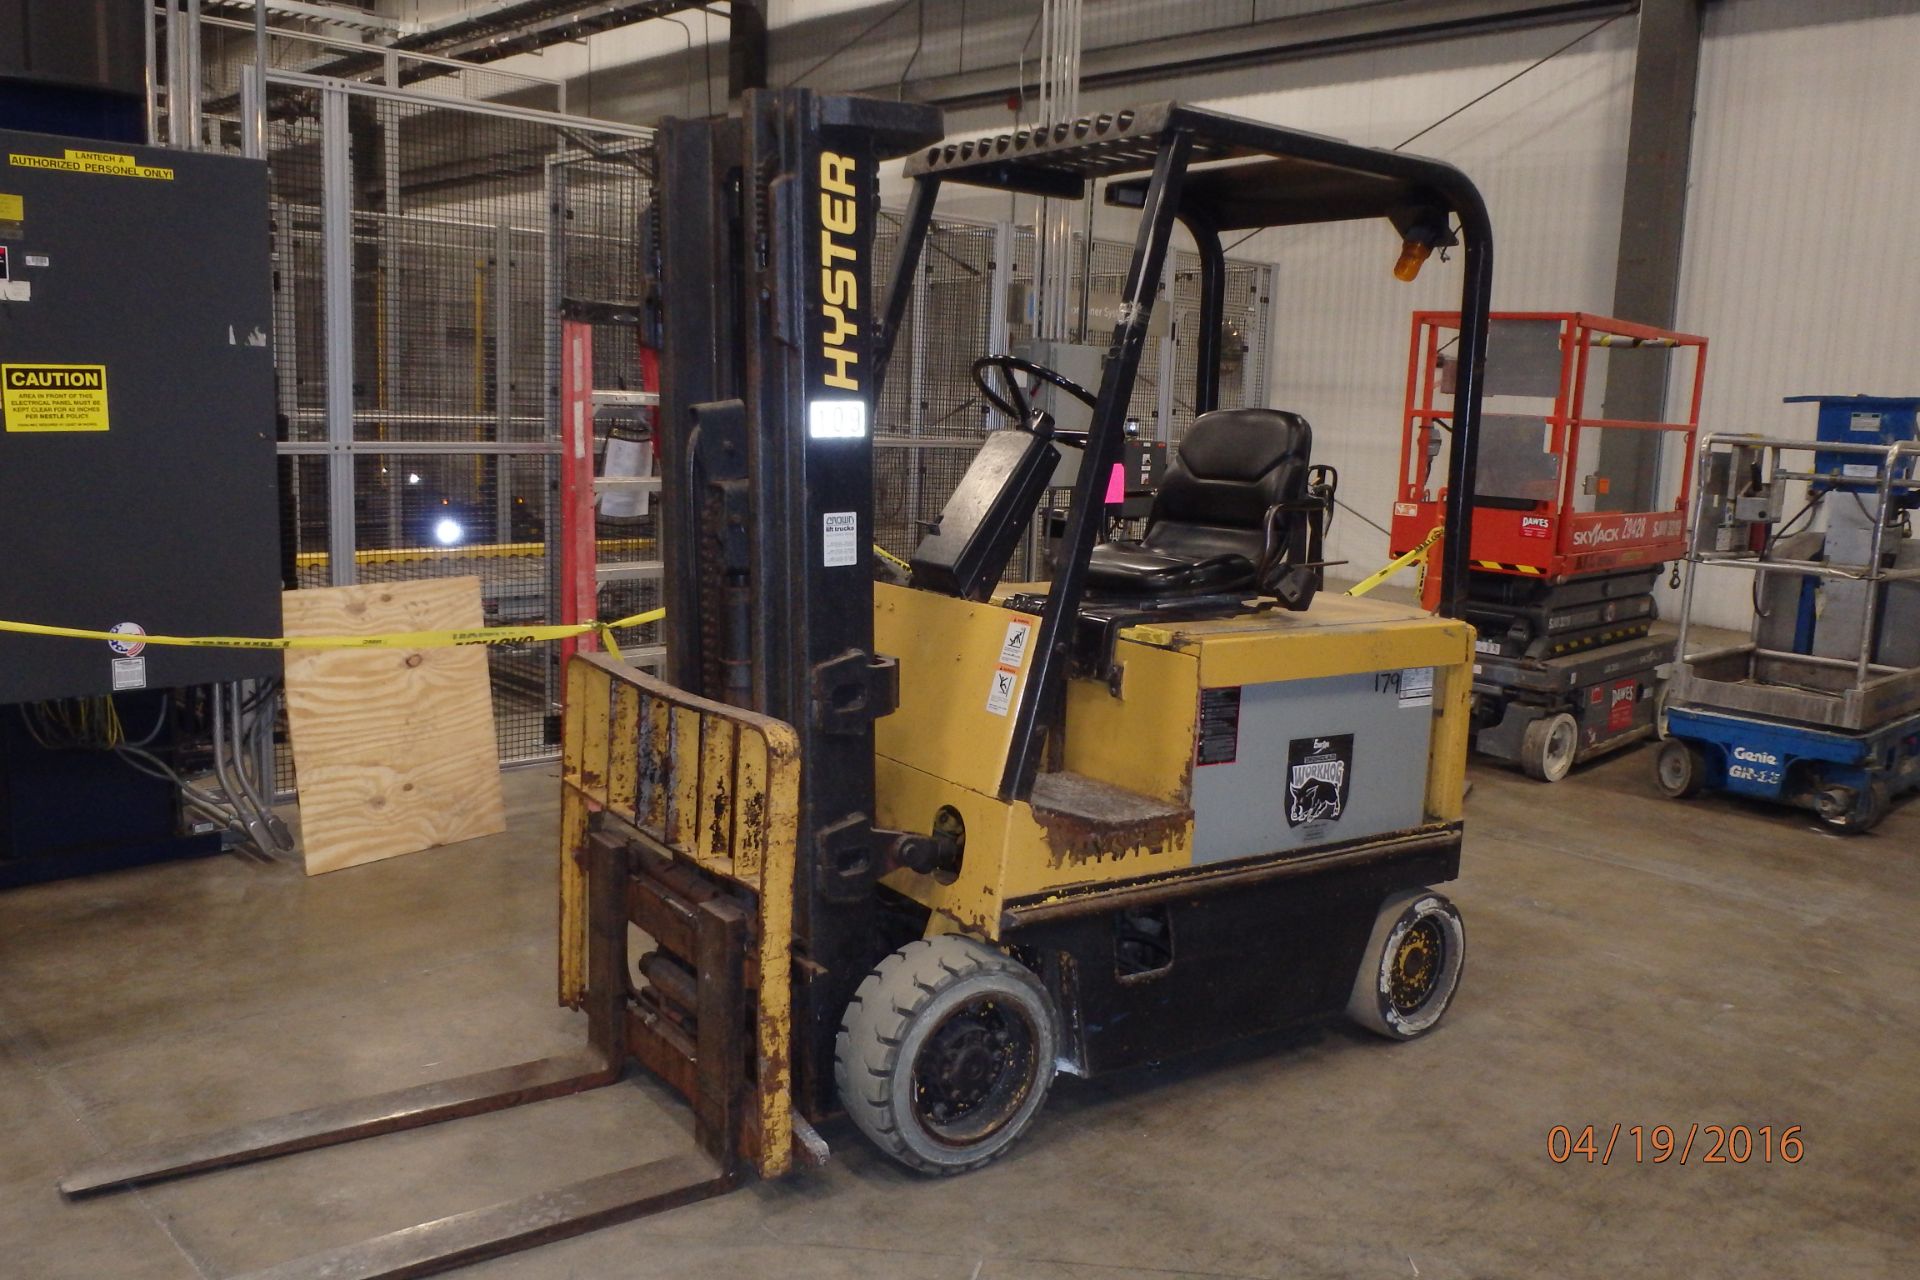 Hyster 5,000 LB Forklift, Model E50XL33, S/N C108V07187J, 3-Stage Mast, 36-Volt (Located in Wis - Image 2 of 3